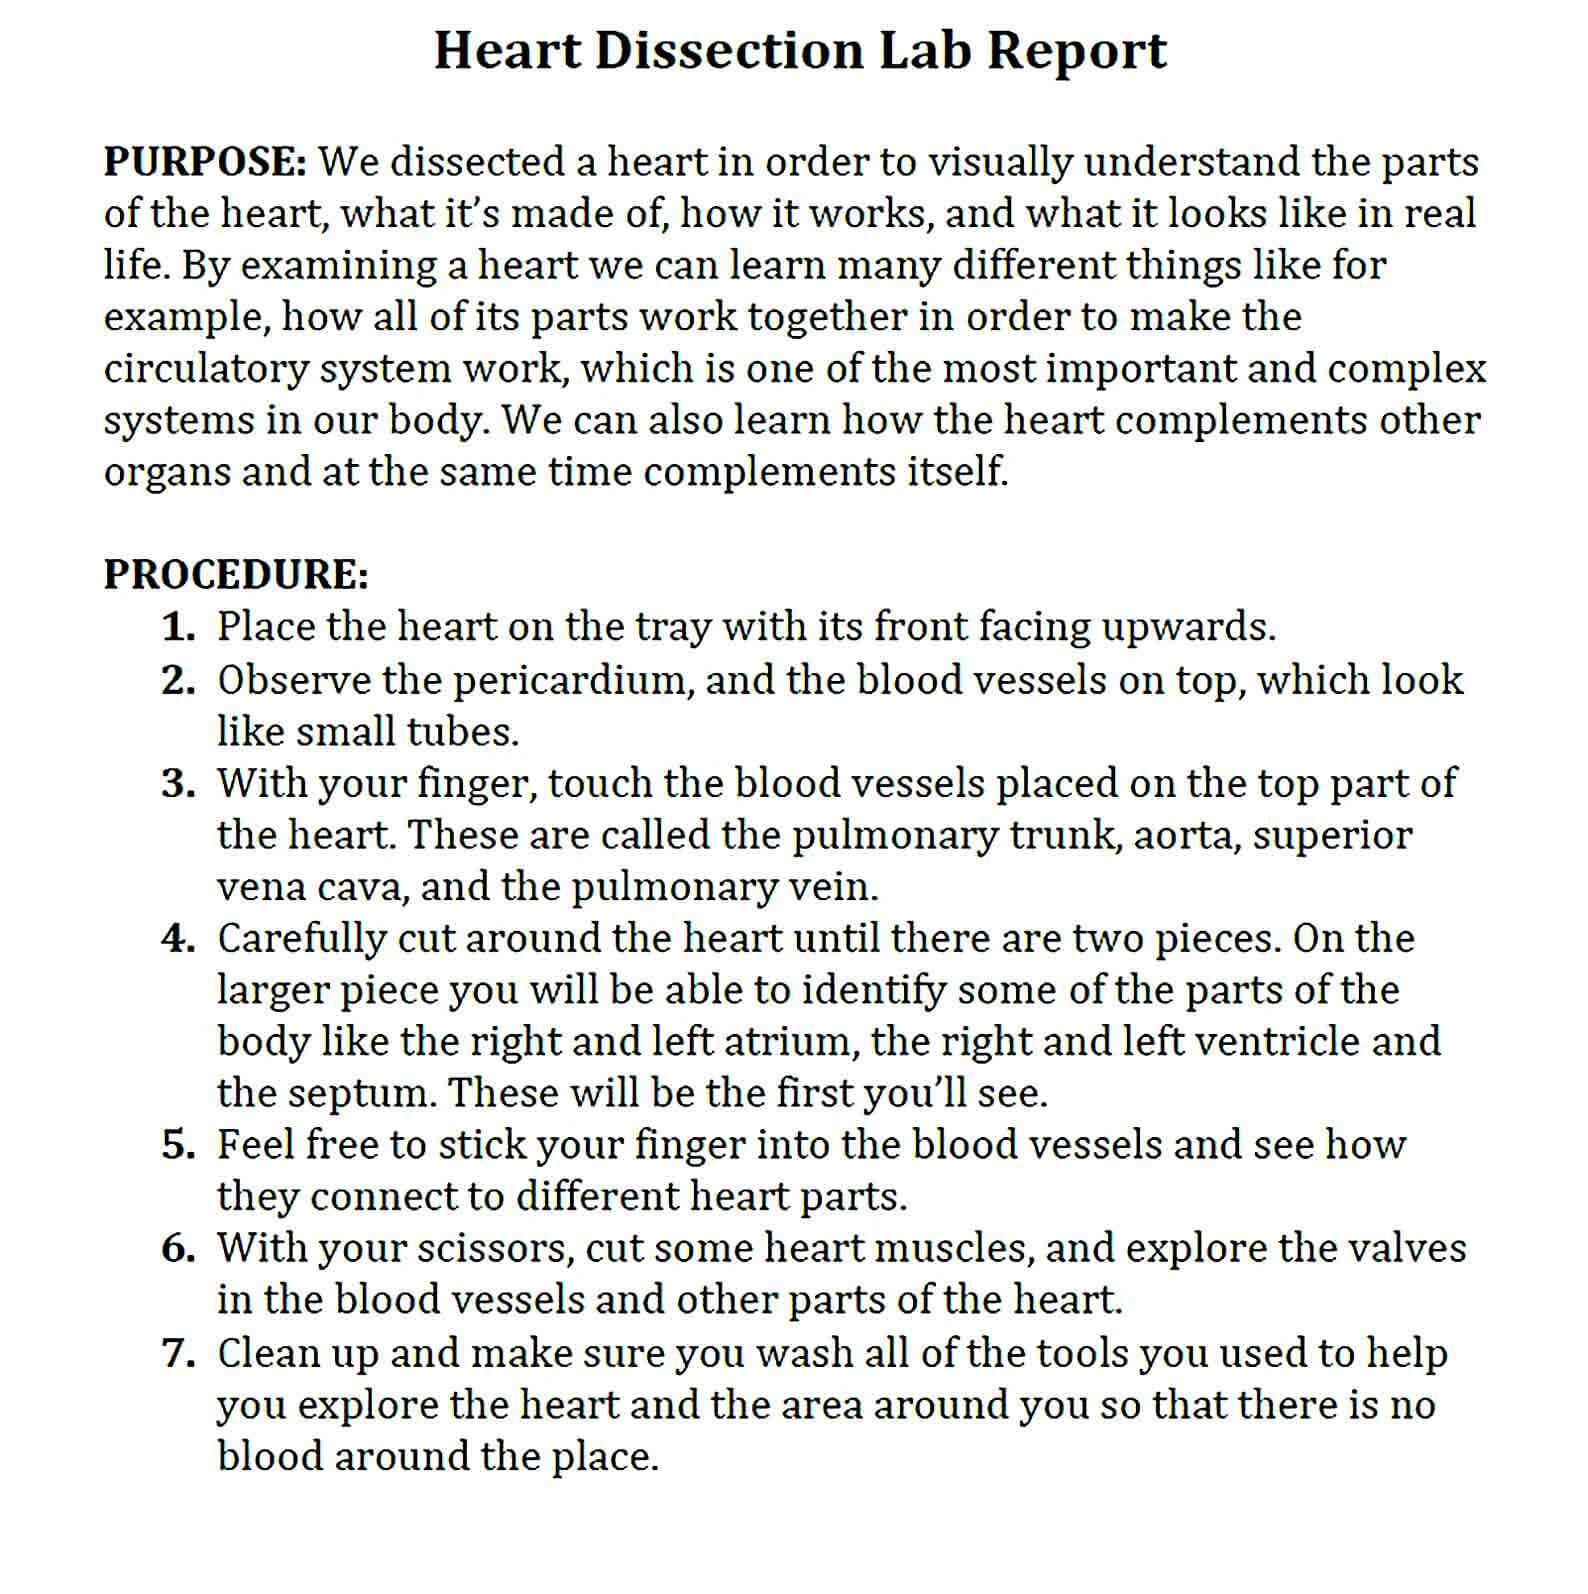 Sample dissection lab report template